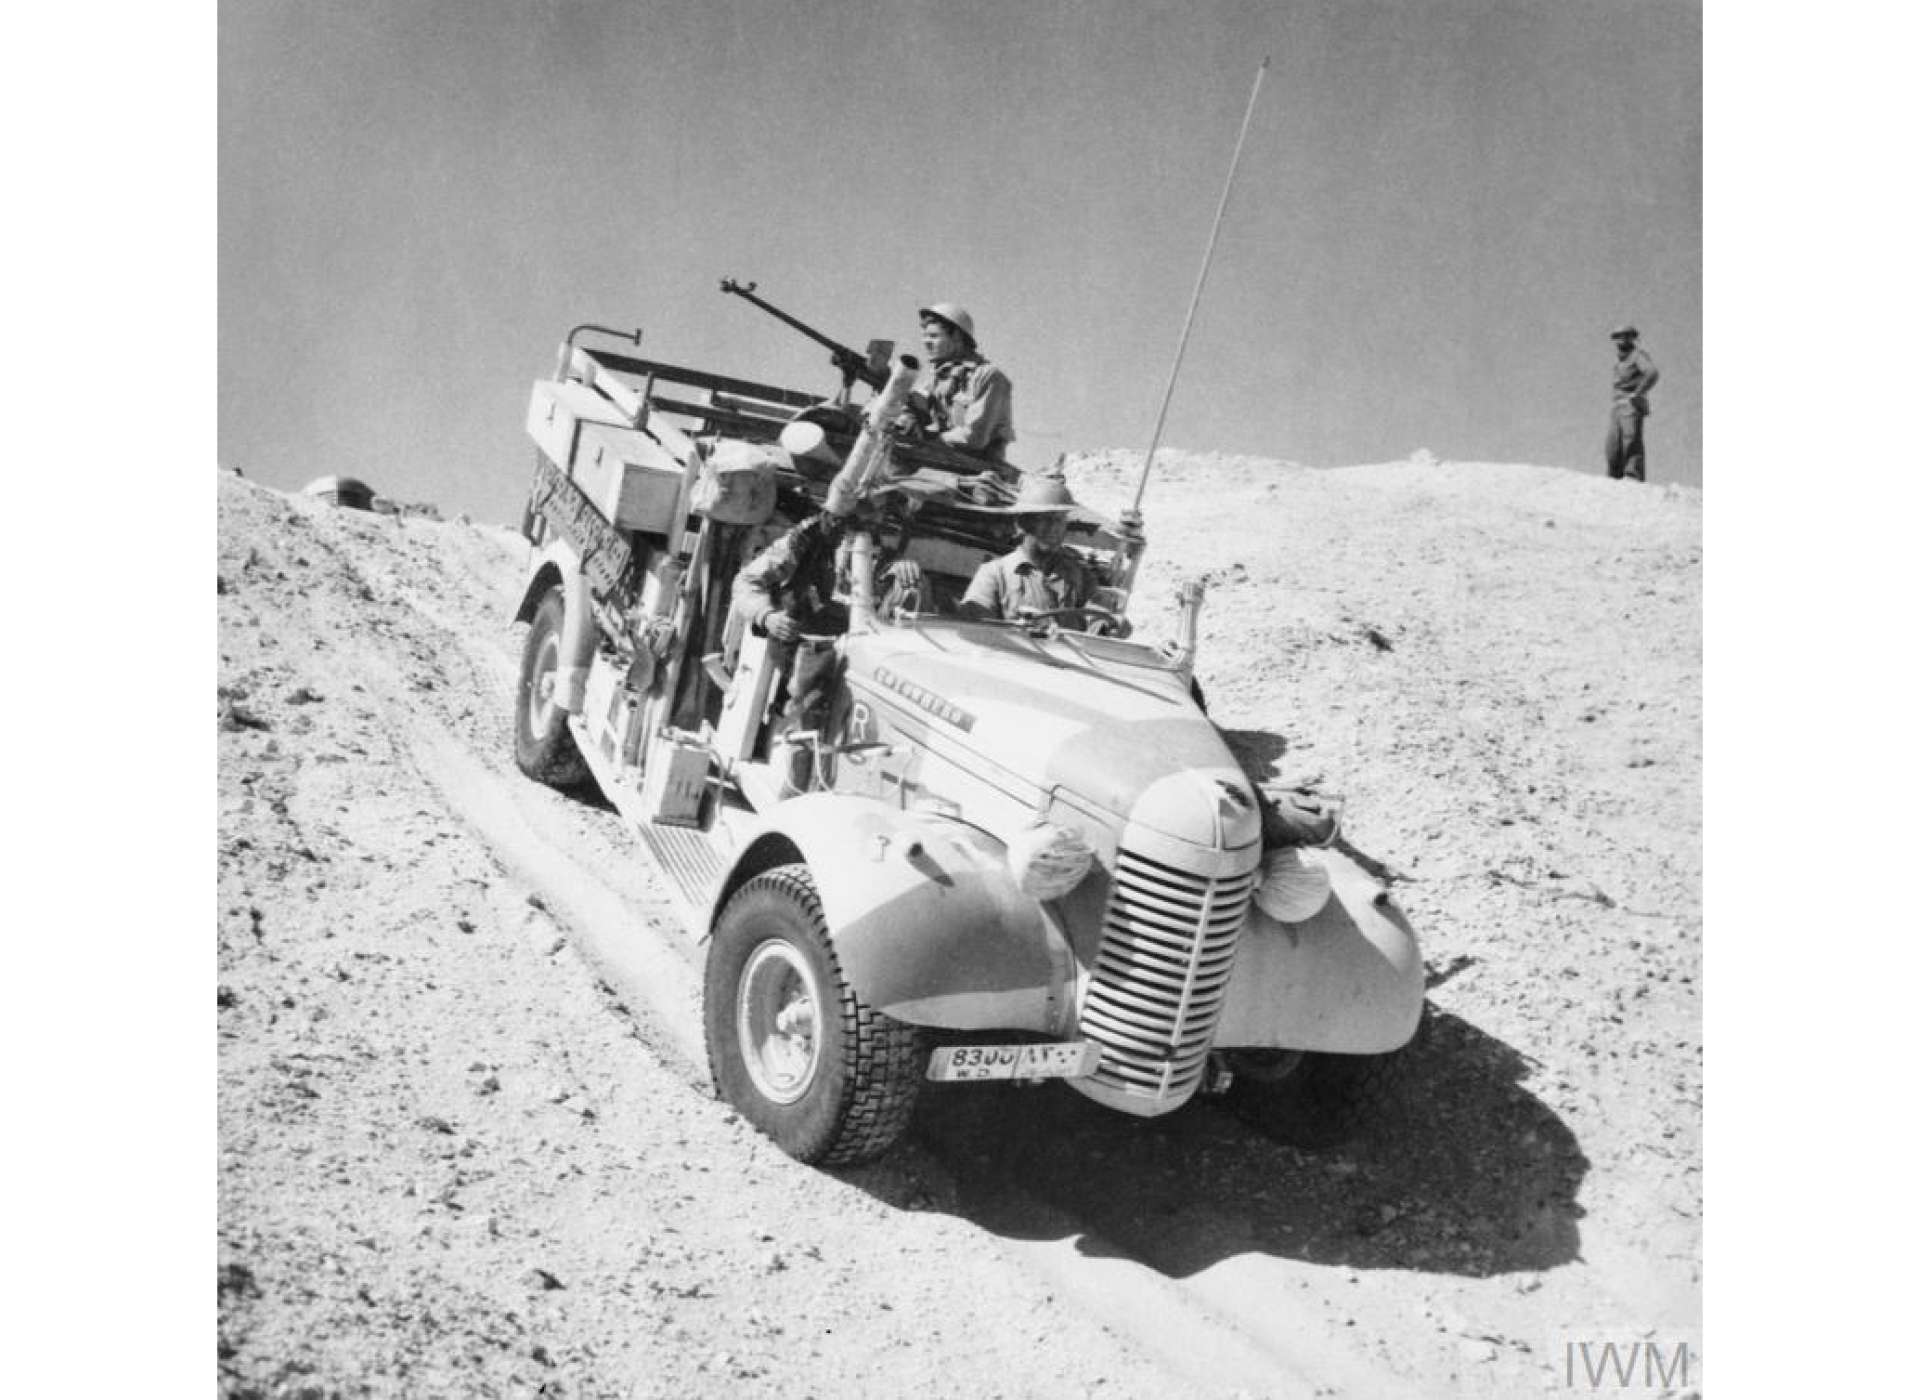 A Long Range Desert Group Chevrolet 30cwt truck negotiates the slope of a sand dune during a patrol in the desert, 27 March 1941. Note the Boys Anti Tank rifle.